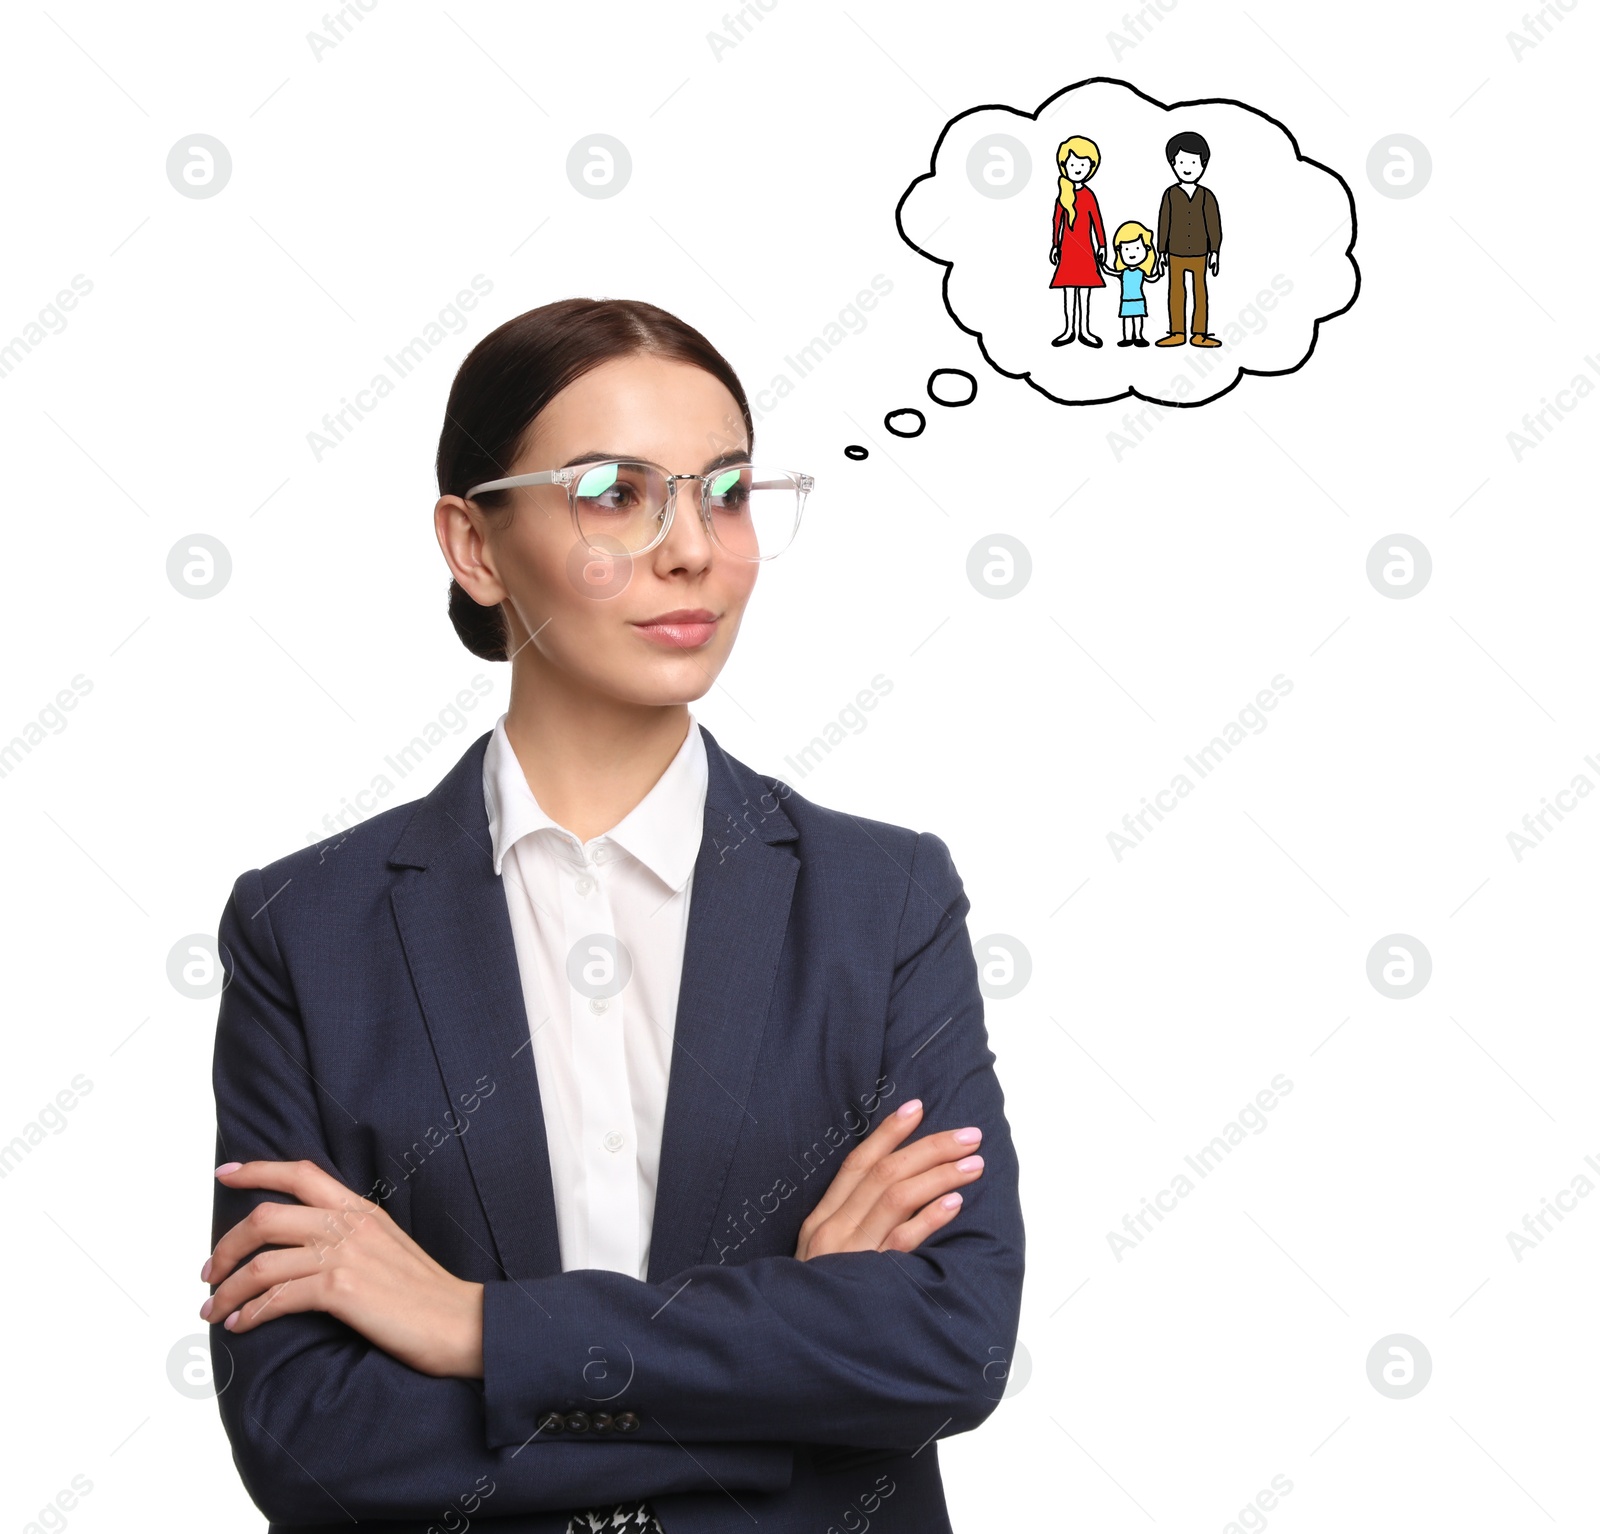 Image of Businesswoman dreaming about family on white background. Concept of balance between life and work